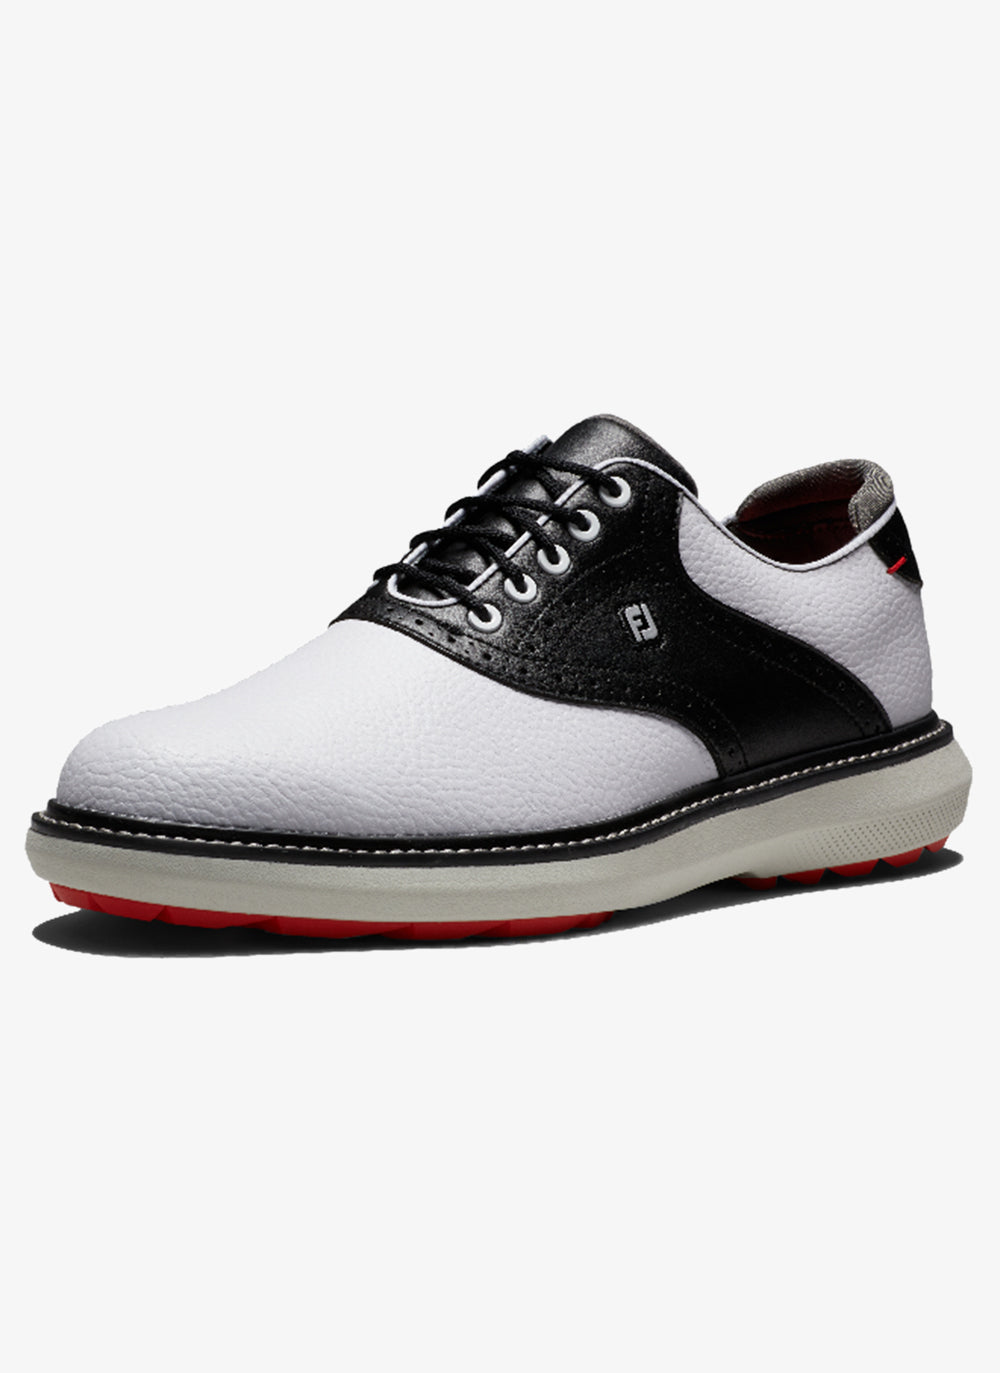 FootJoy Traditions Golf Shoes 57924